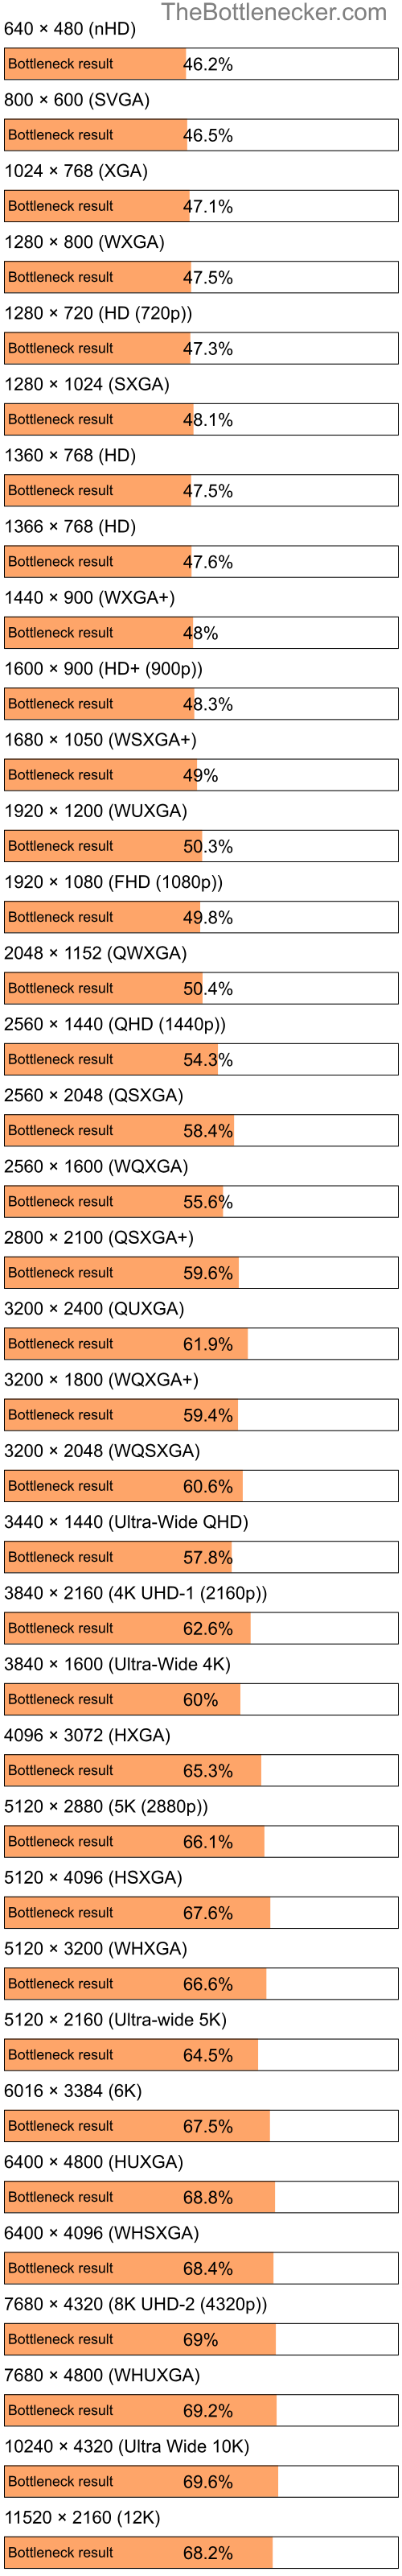 Bottleneck results by resolution for Intel Pentium 4 and NVIDIA GeForce 9200M GS in Processor Intense Tasks